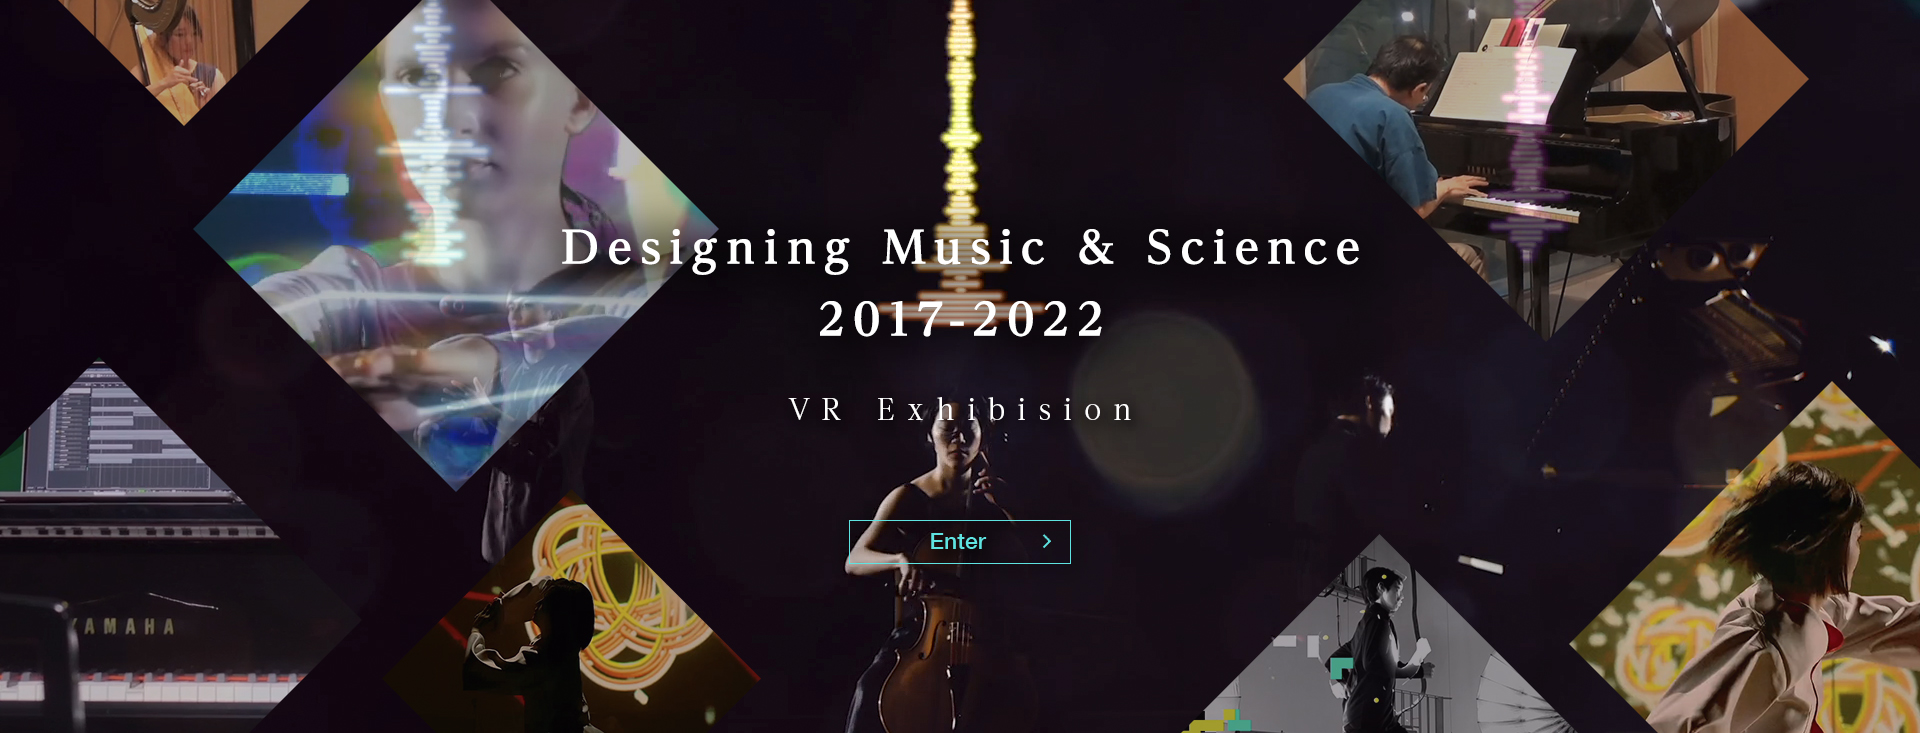 Disigning Music & Science 2017-2022